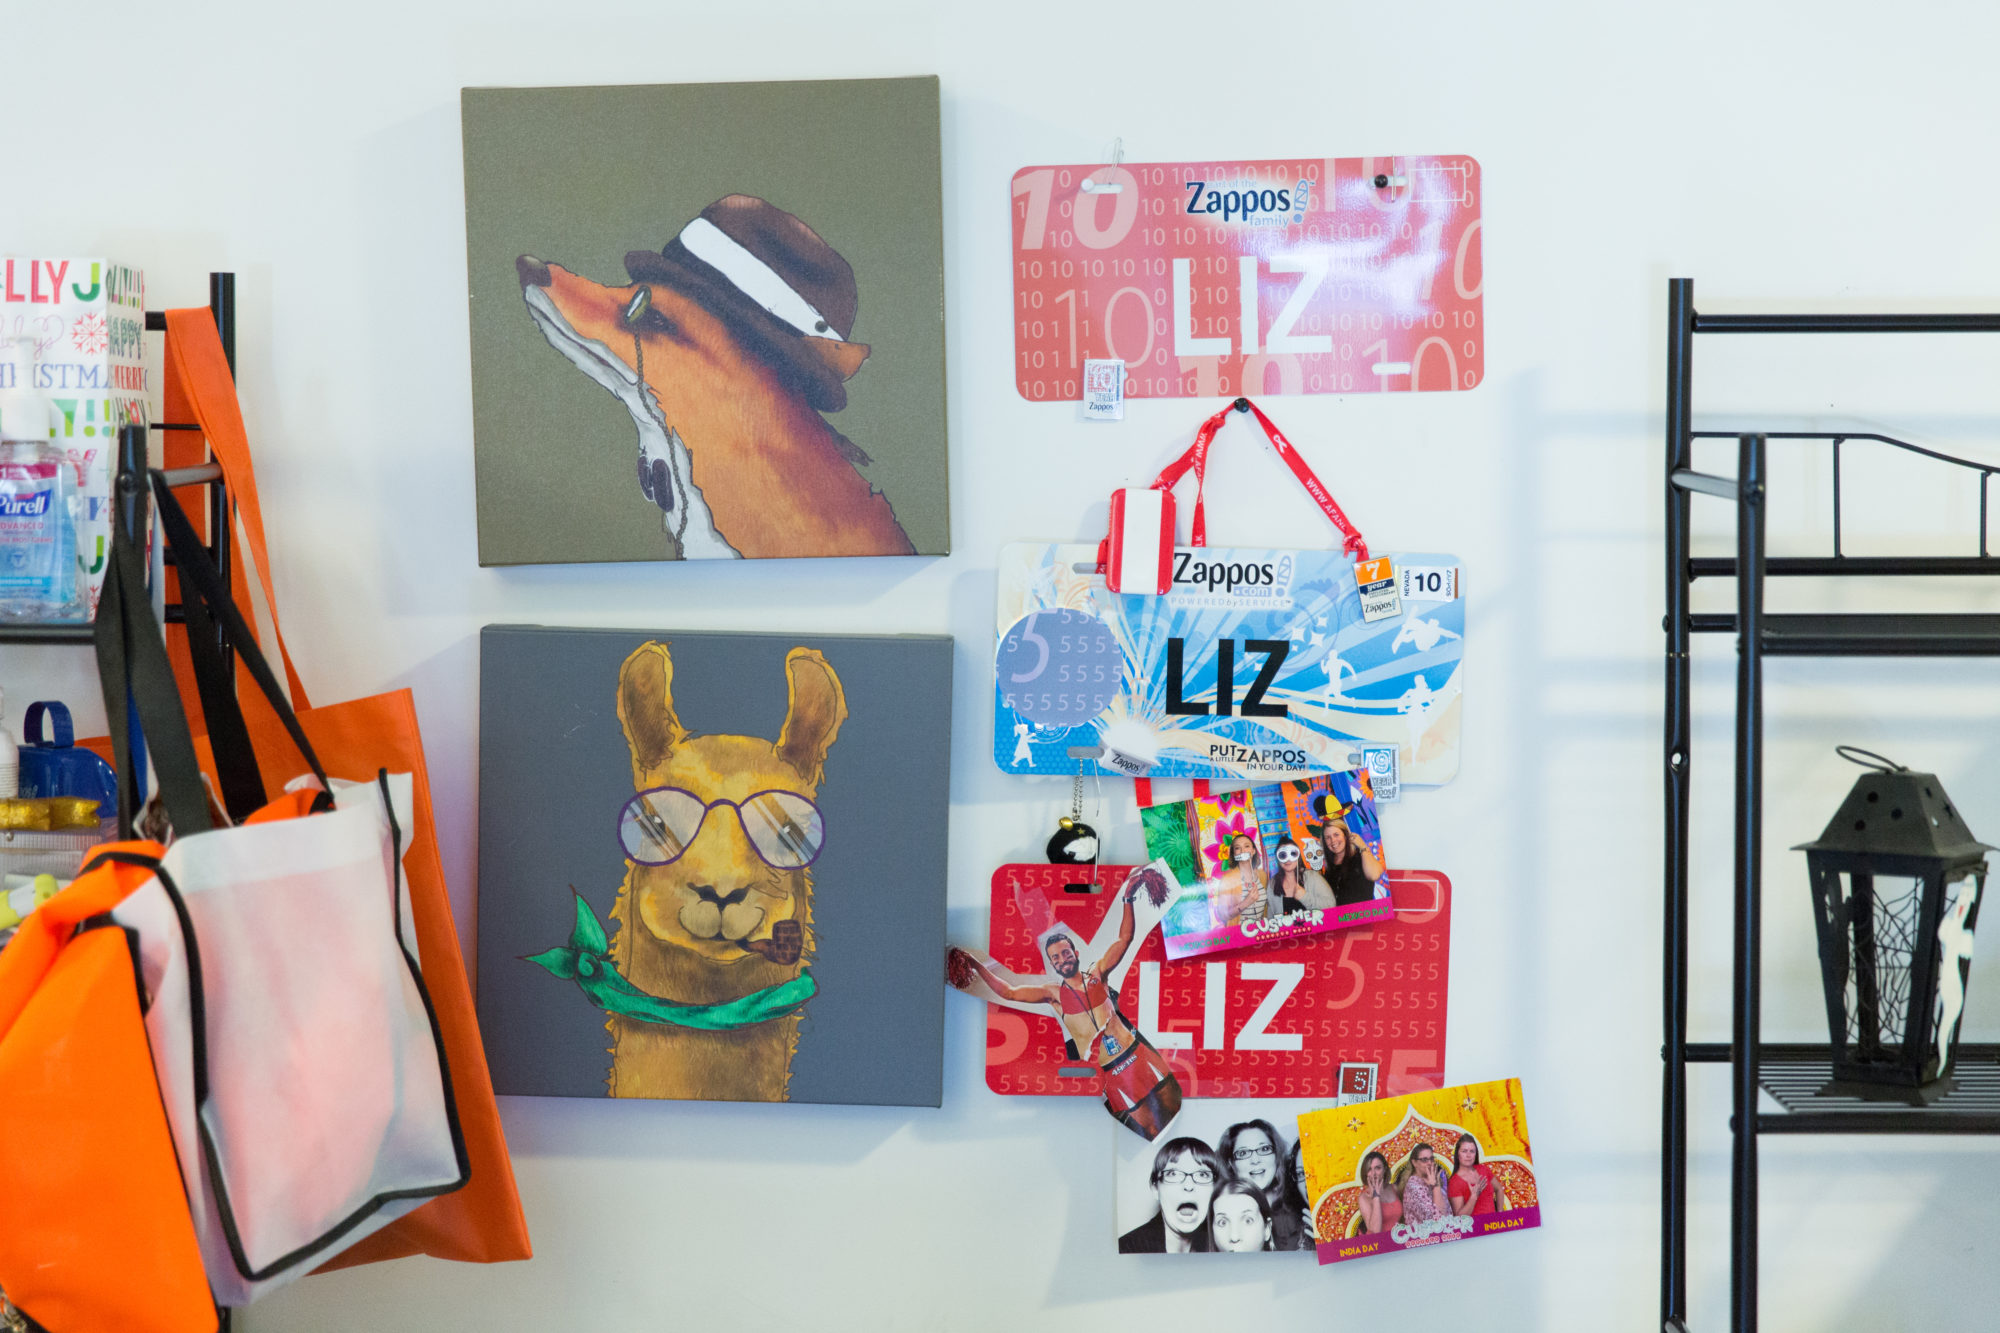 wall with images of a llama in glasses and a green scarf, a fox in a hat, bags and signs hanging from white wall